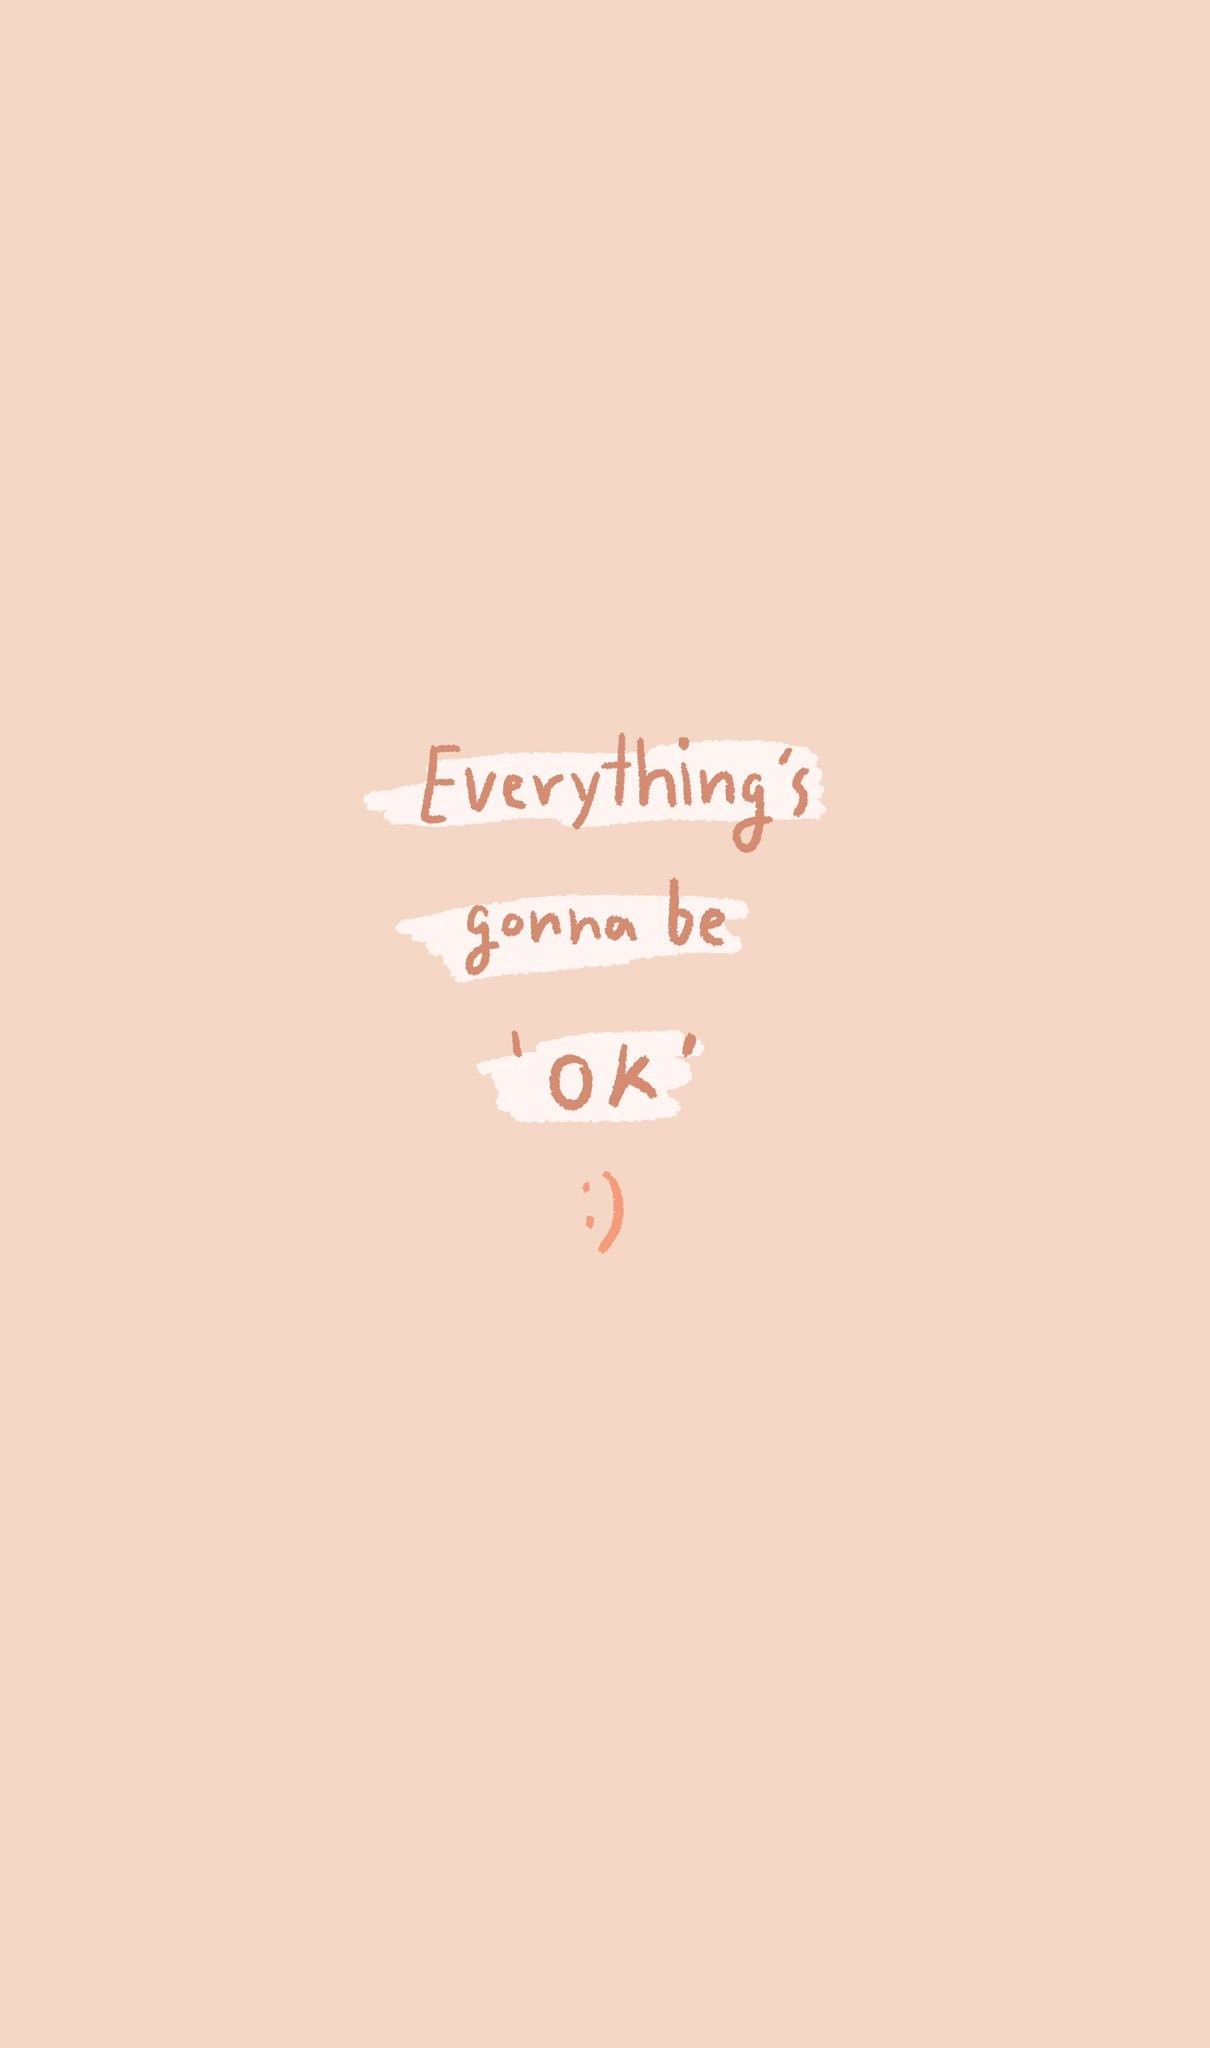 Sometimes. All you need to hear from your loved one is. Everything is going to be ok. Inspirational phone wallpaper, Wallpaper quotes, Phone wallpaper quotes